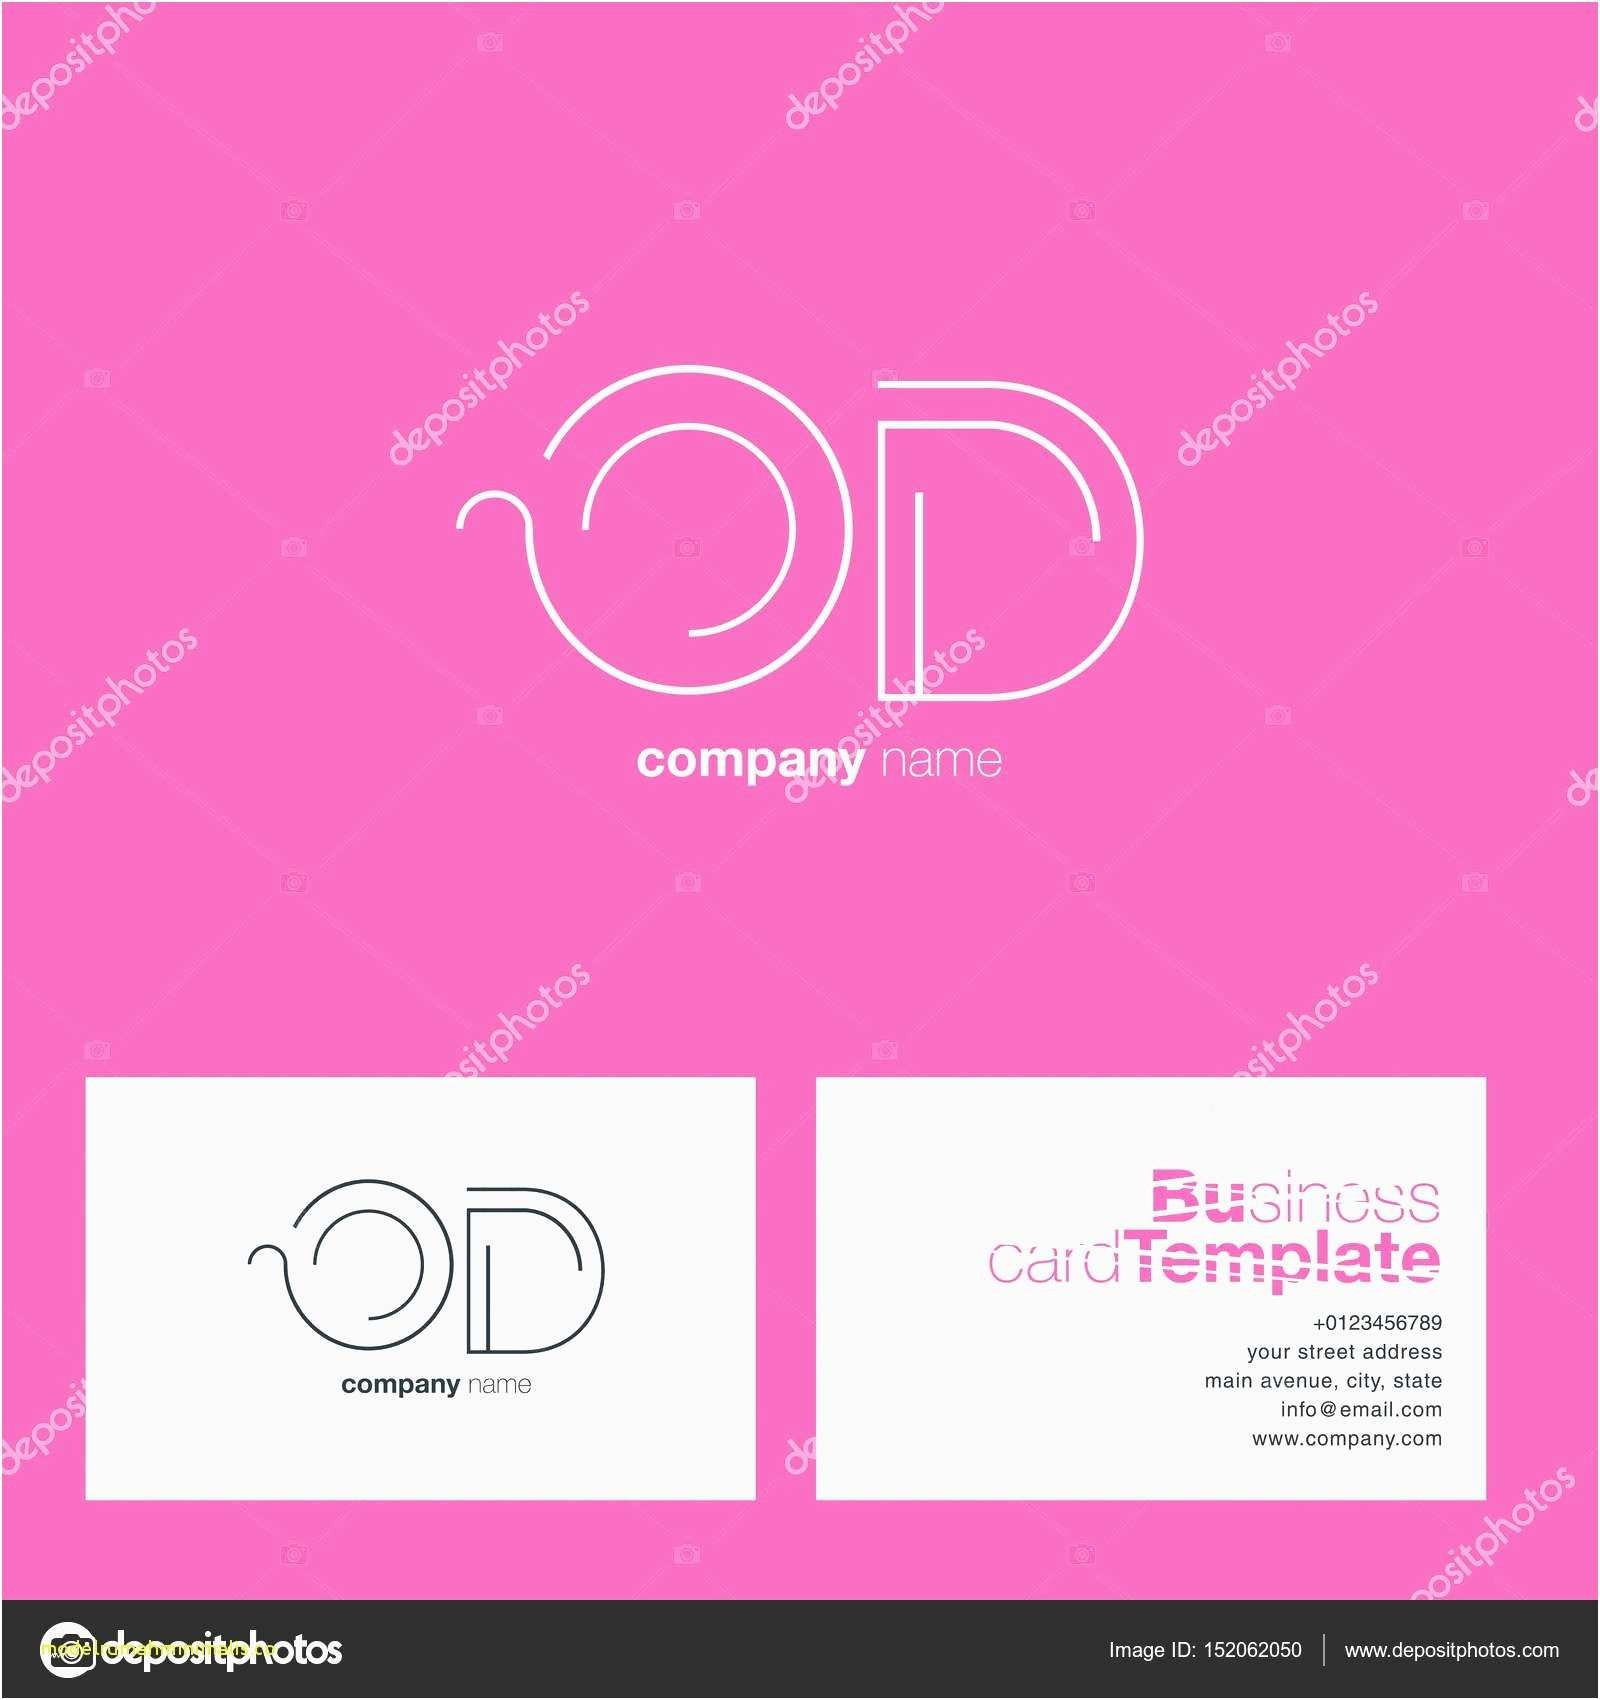 Lovely Money Business Card Template Of Pink Business Card Template